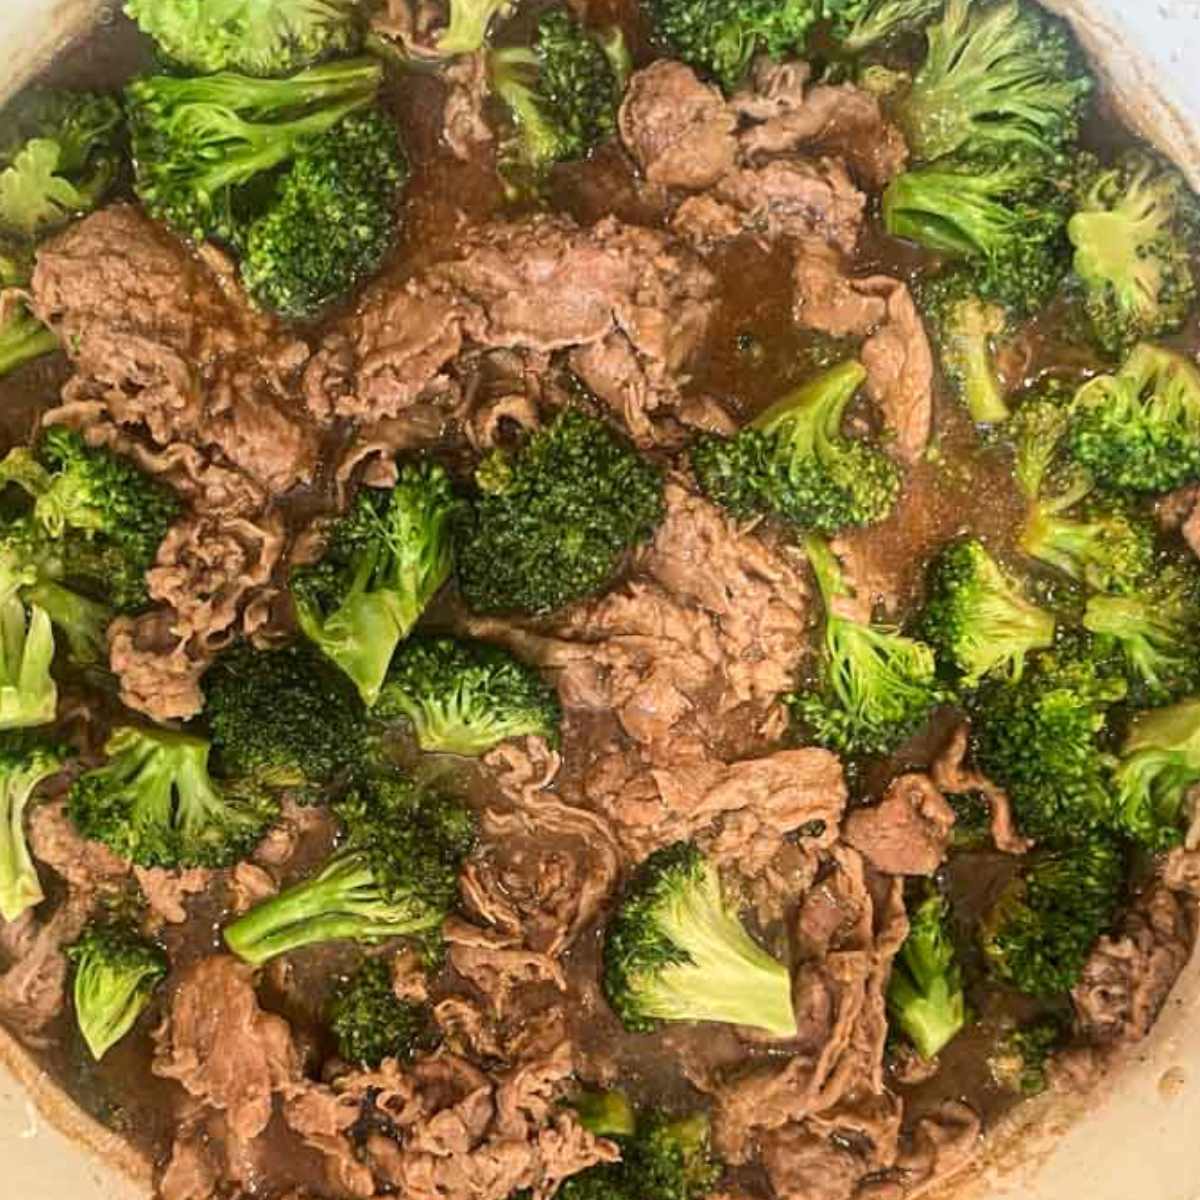 Featured image for trader joe's shaved steak and broccoli.